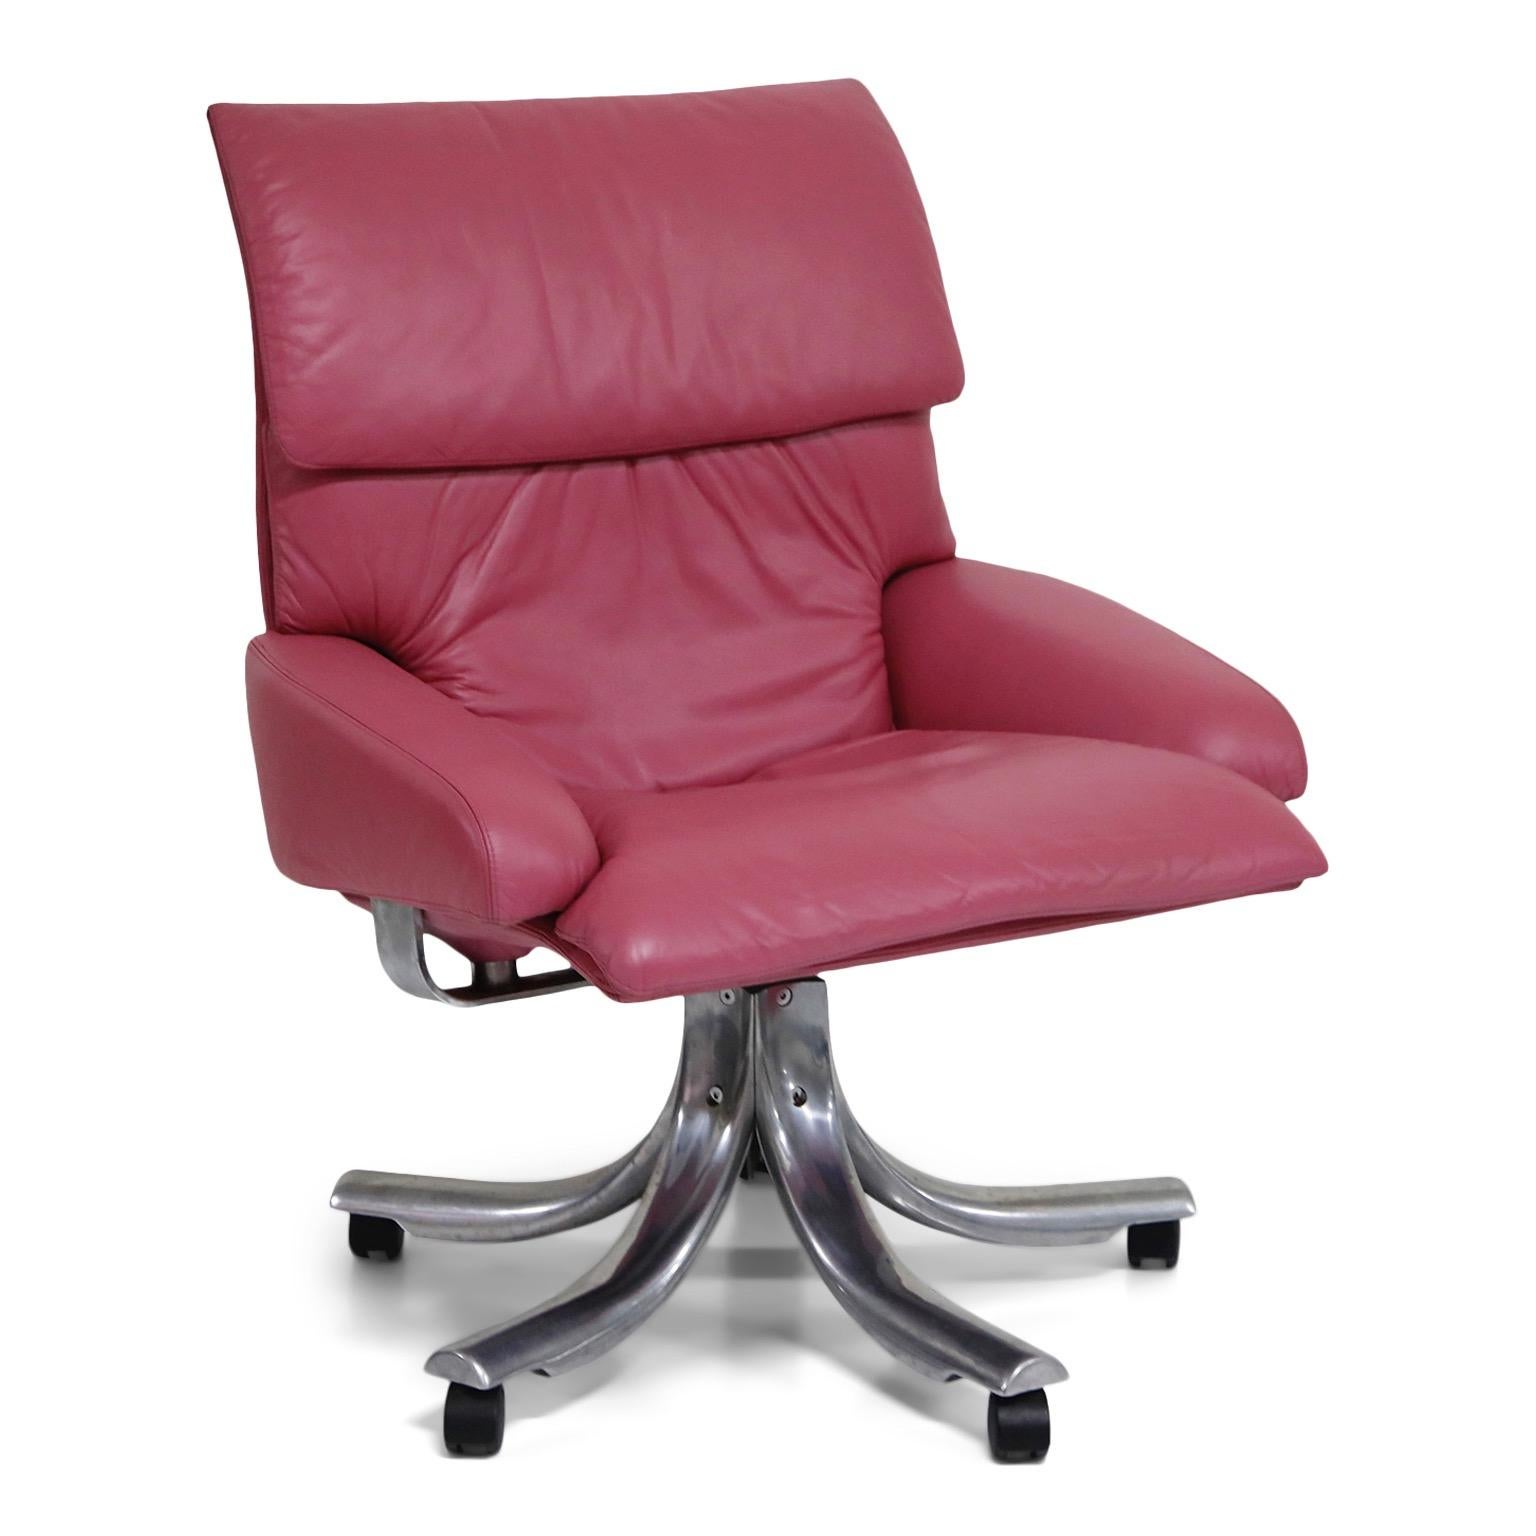 This eye-catching pink leather Onda executive armchair by Giovanni Offredi for Saporiti Italia is very rare in this executive desk chair form. Normally found as a lounge chair, this rare example has the Onda wave armchair design atop a five star